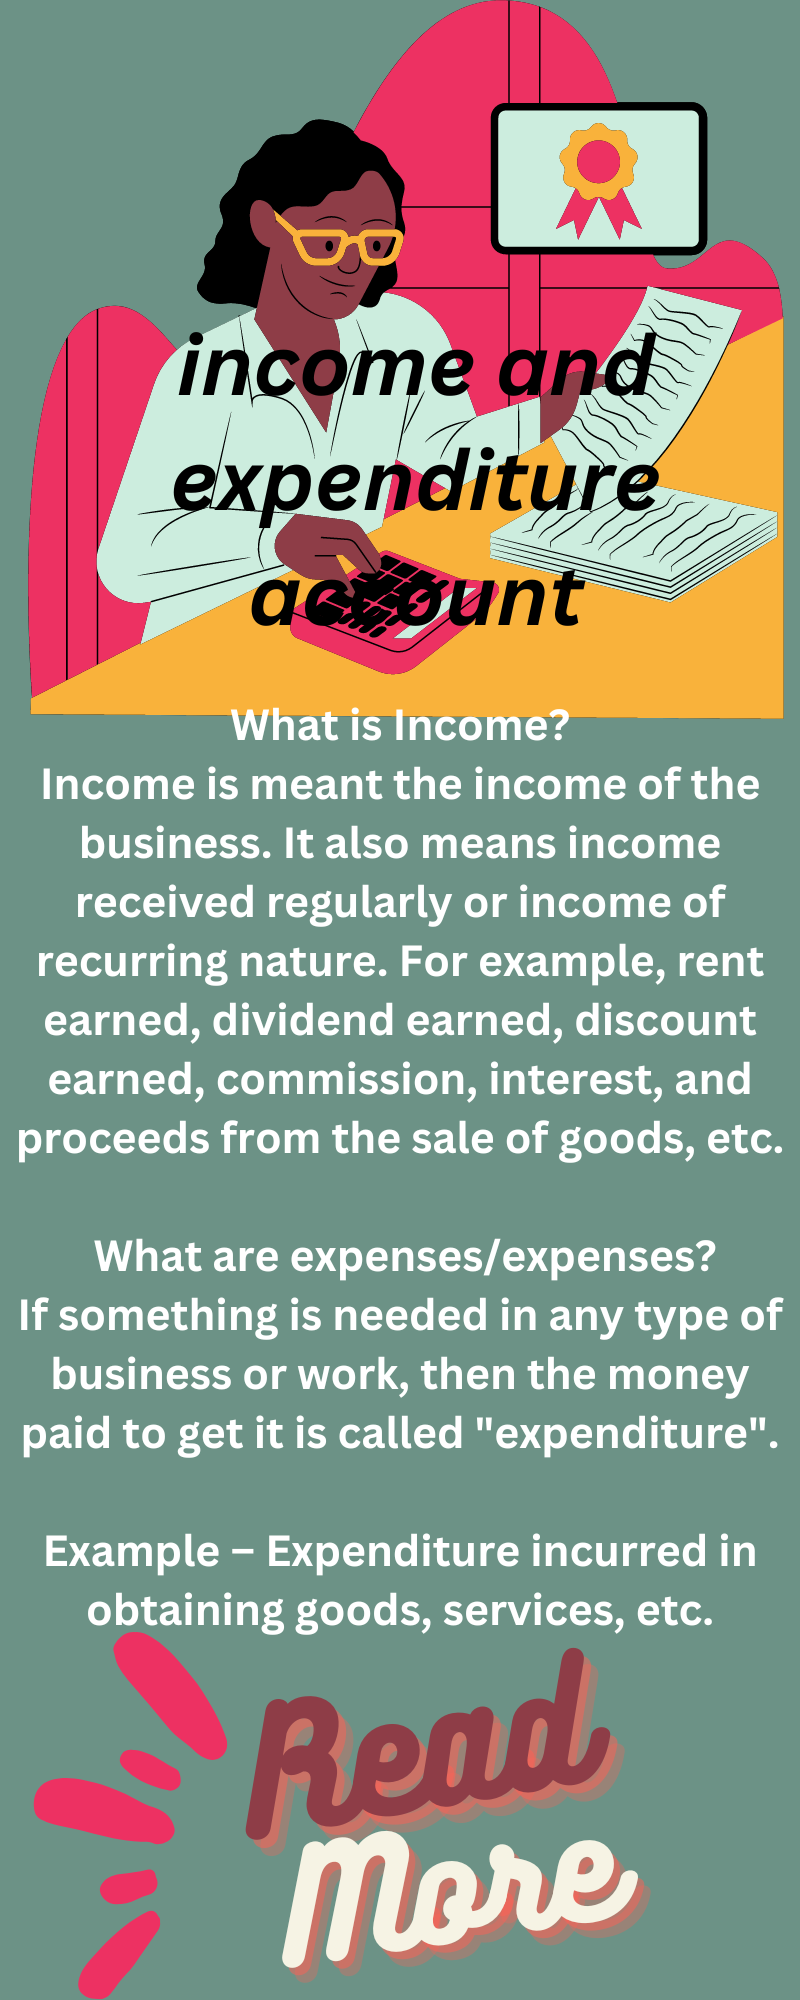 income and expenditure account